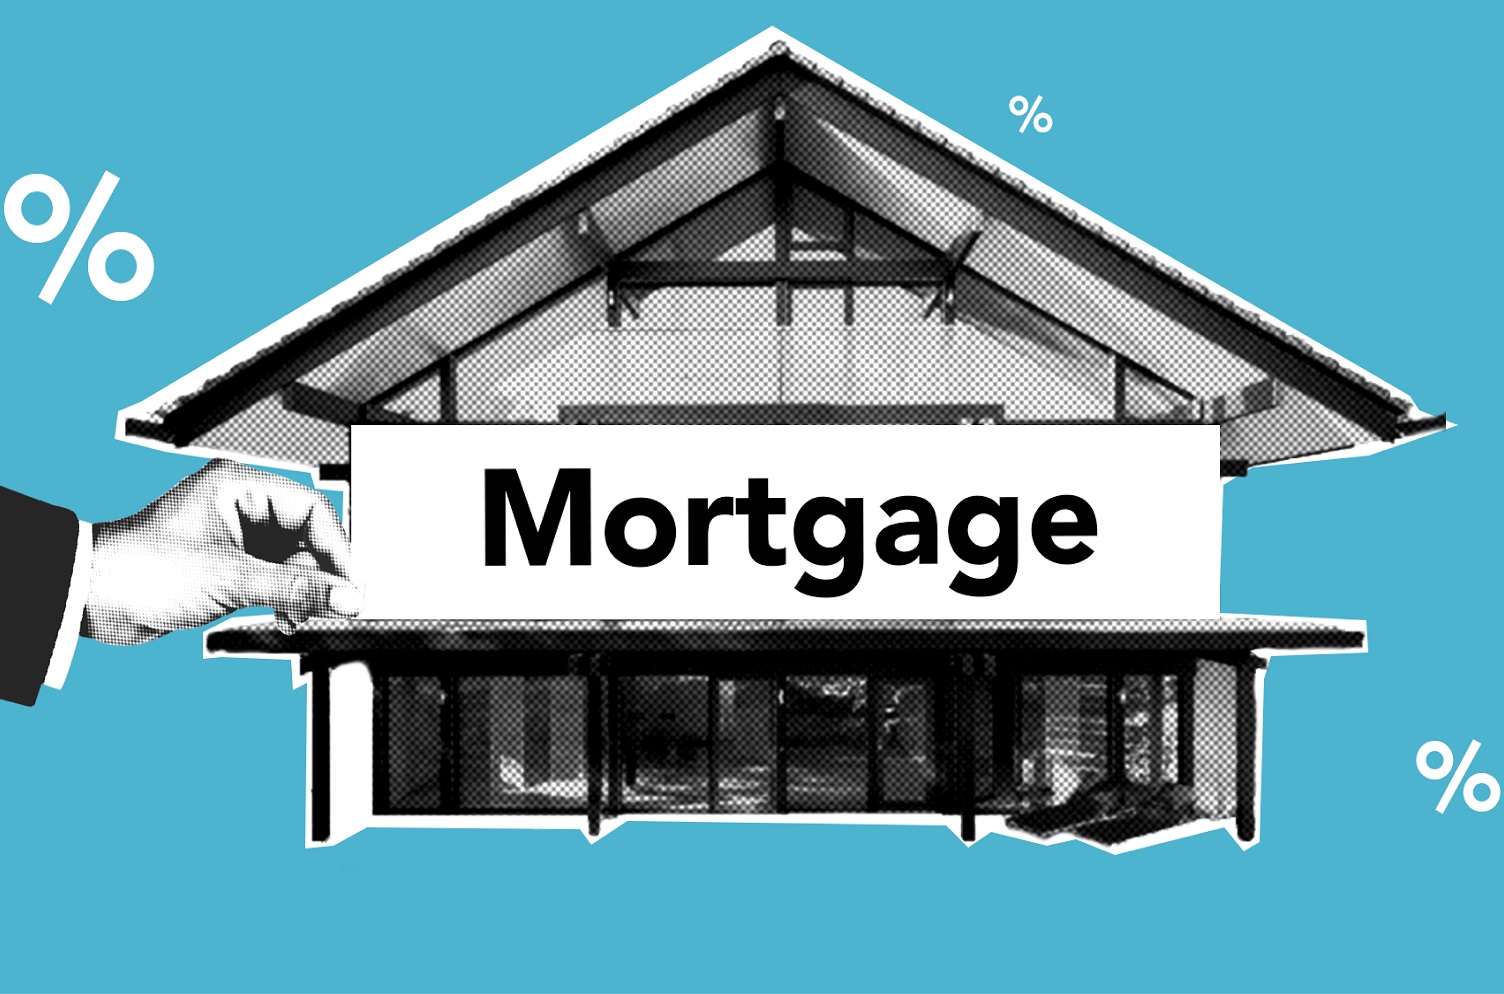 Update on Base Rates, Rising Interest and the Impact on the Mortgage Lending Market